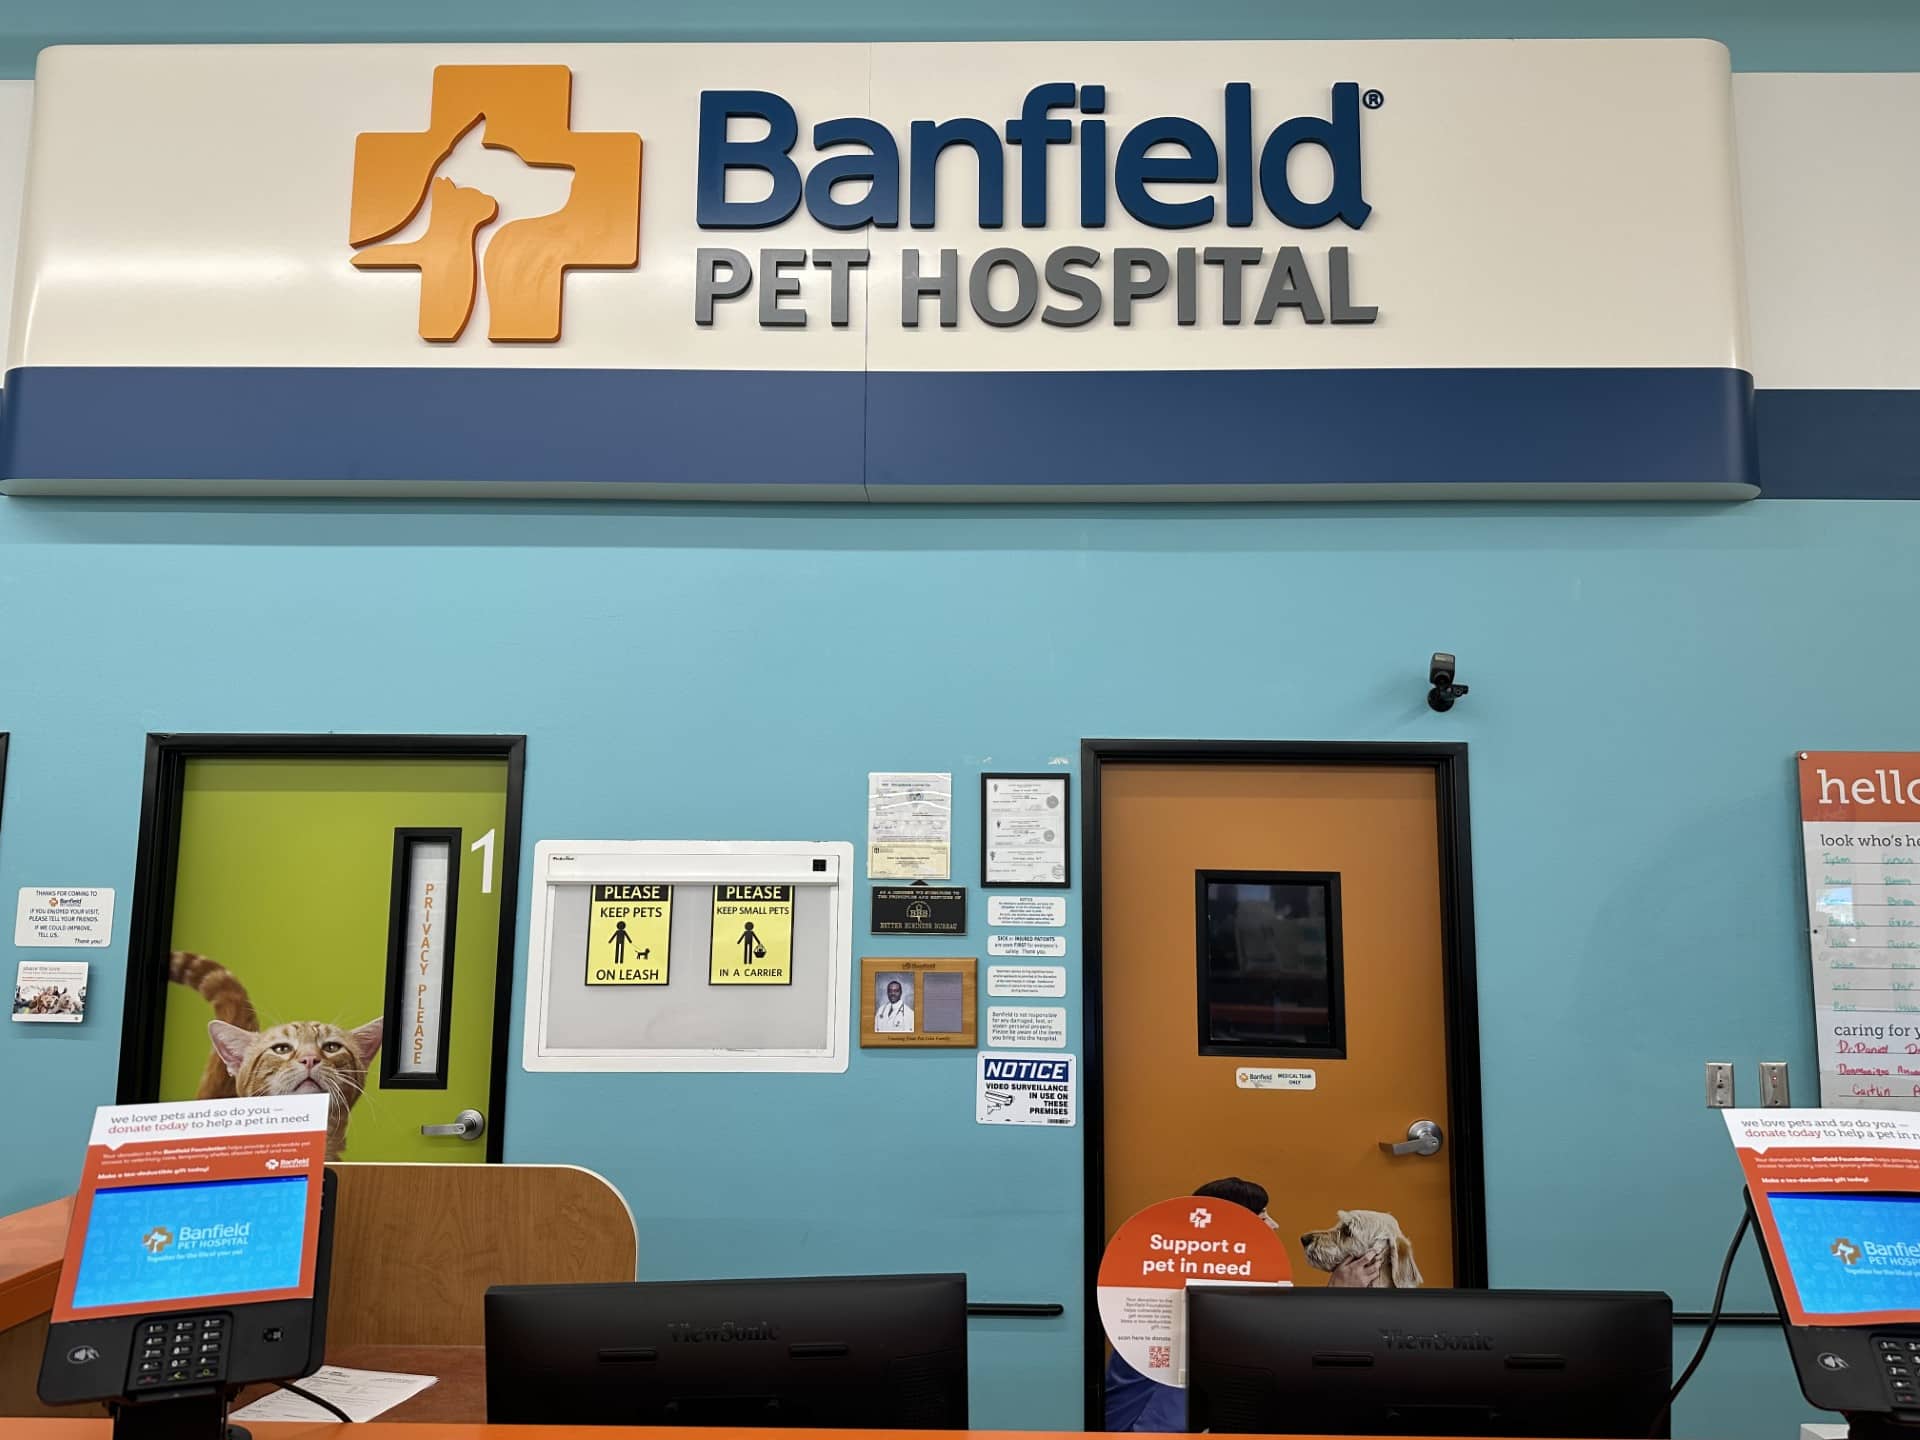 The front desk/waiting area of the Banfield Westbank hospital